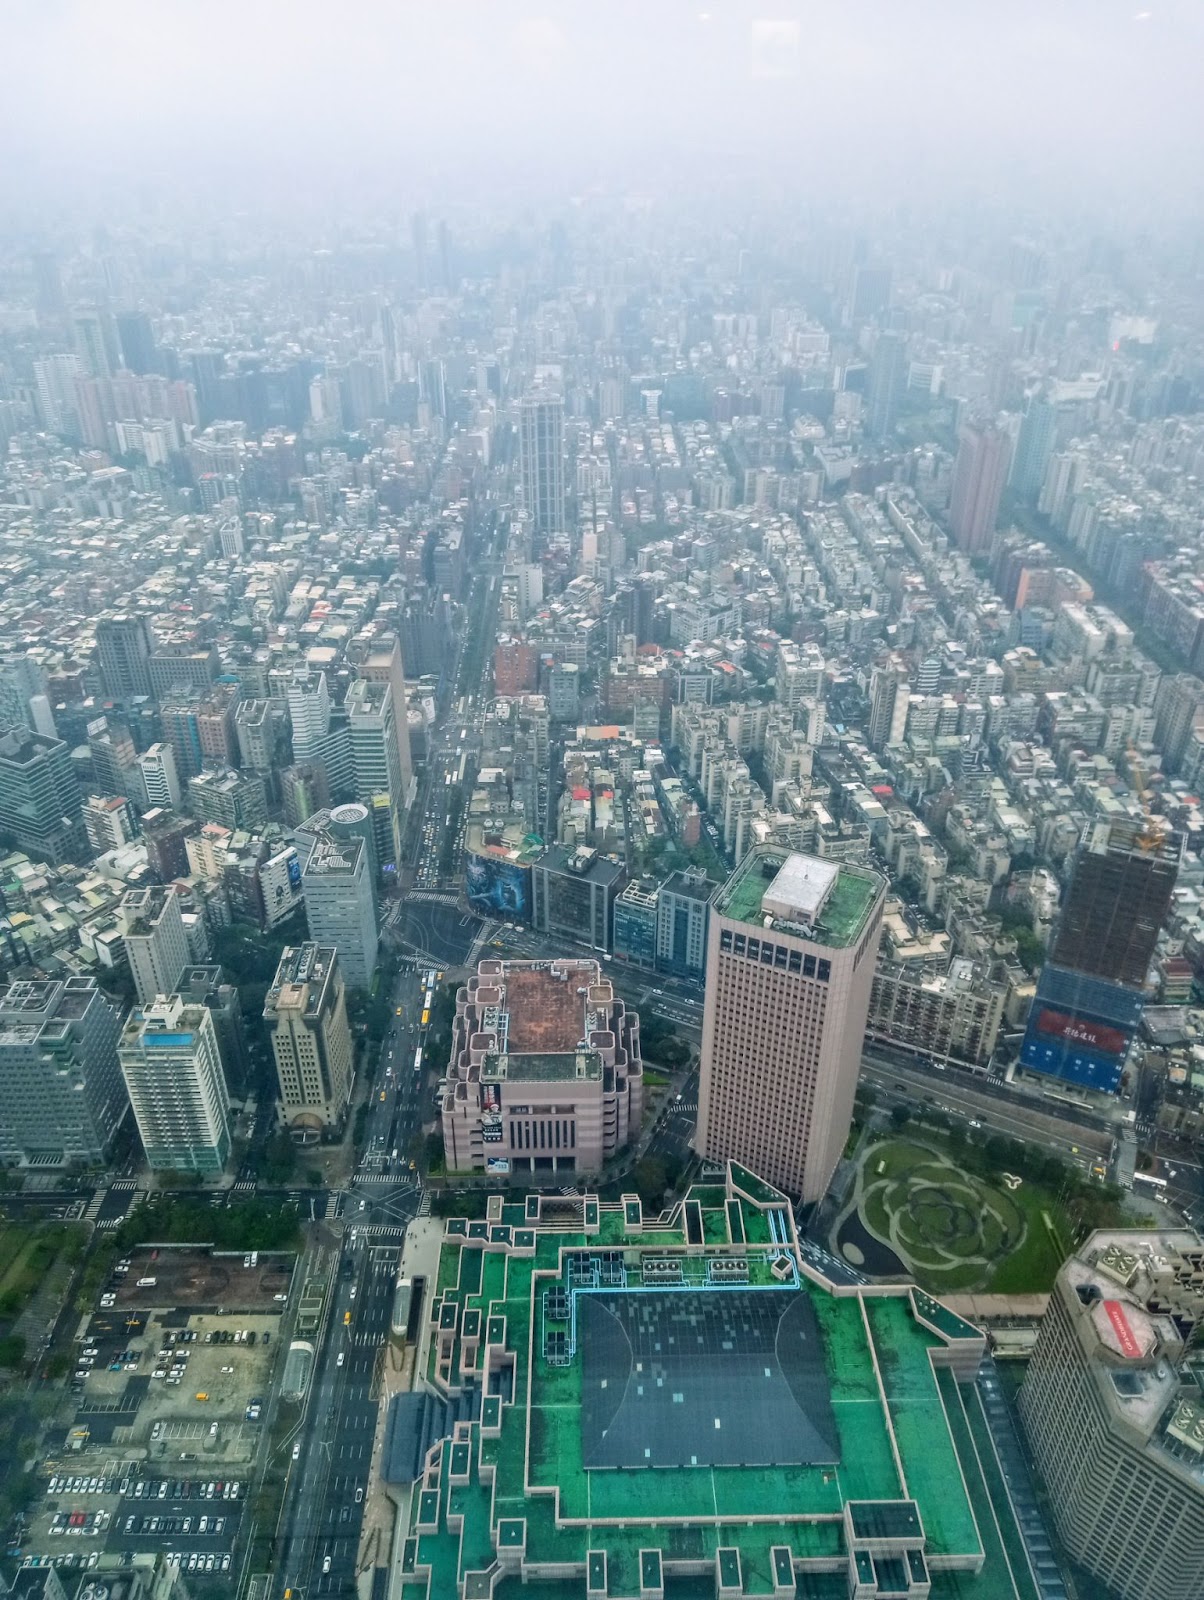 skyline of foggy taiwan showing skyscrapers and buildings in the background and greenery in the foreground